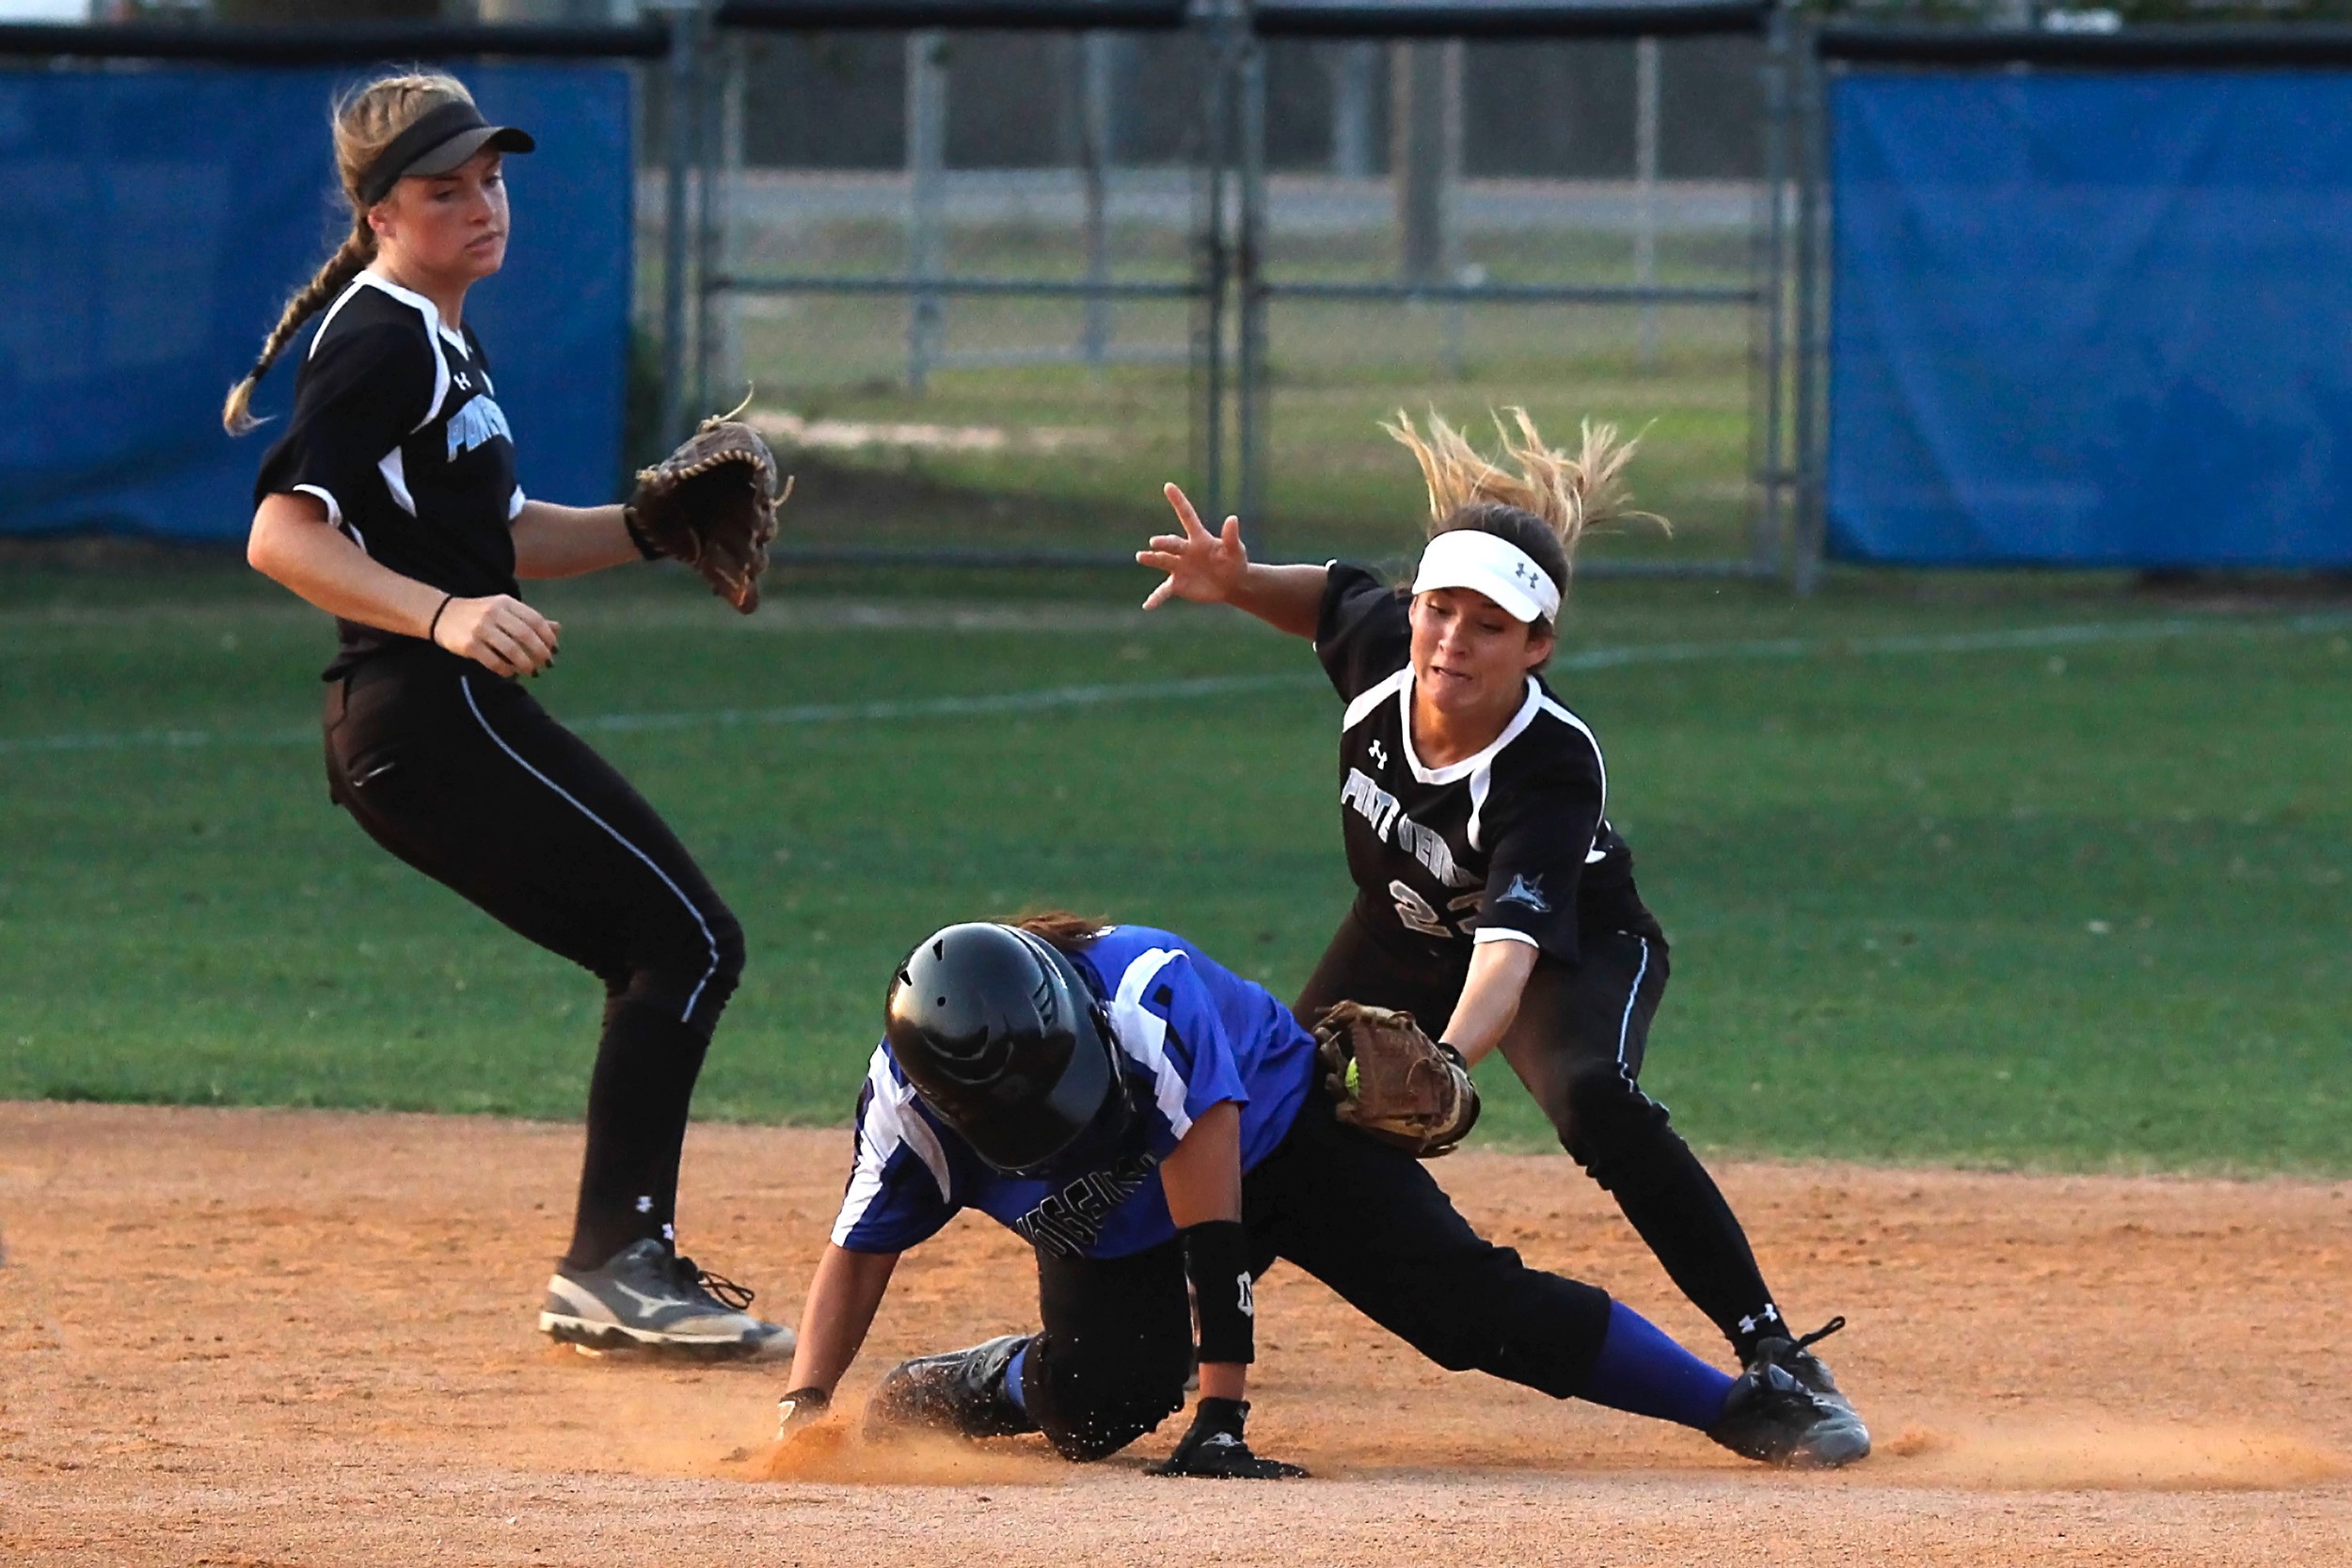 Ponte Vedra’s second baseman Kiley Hennessey puts the tag on the Ridgeview base runner to complete a pickoff from Sharks’ catcher Taylor Bradshaw.